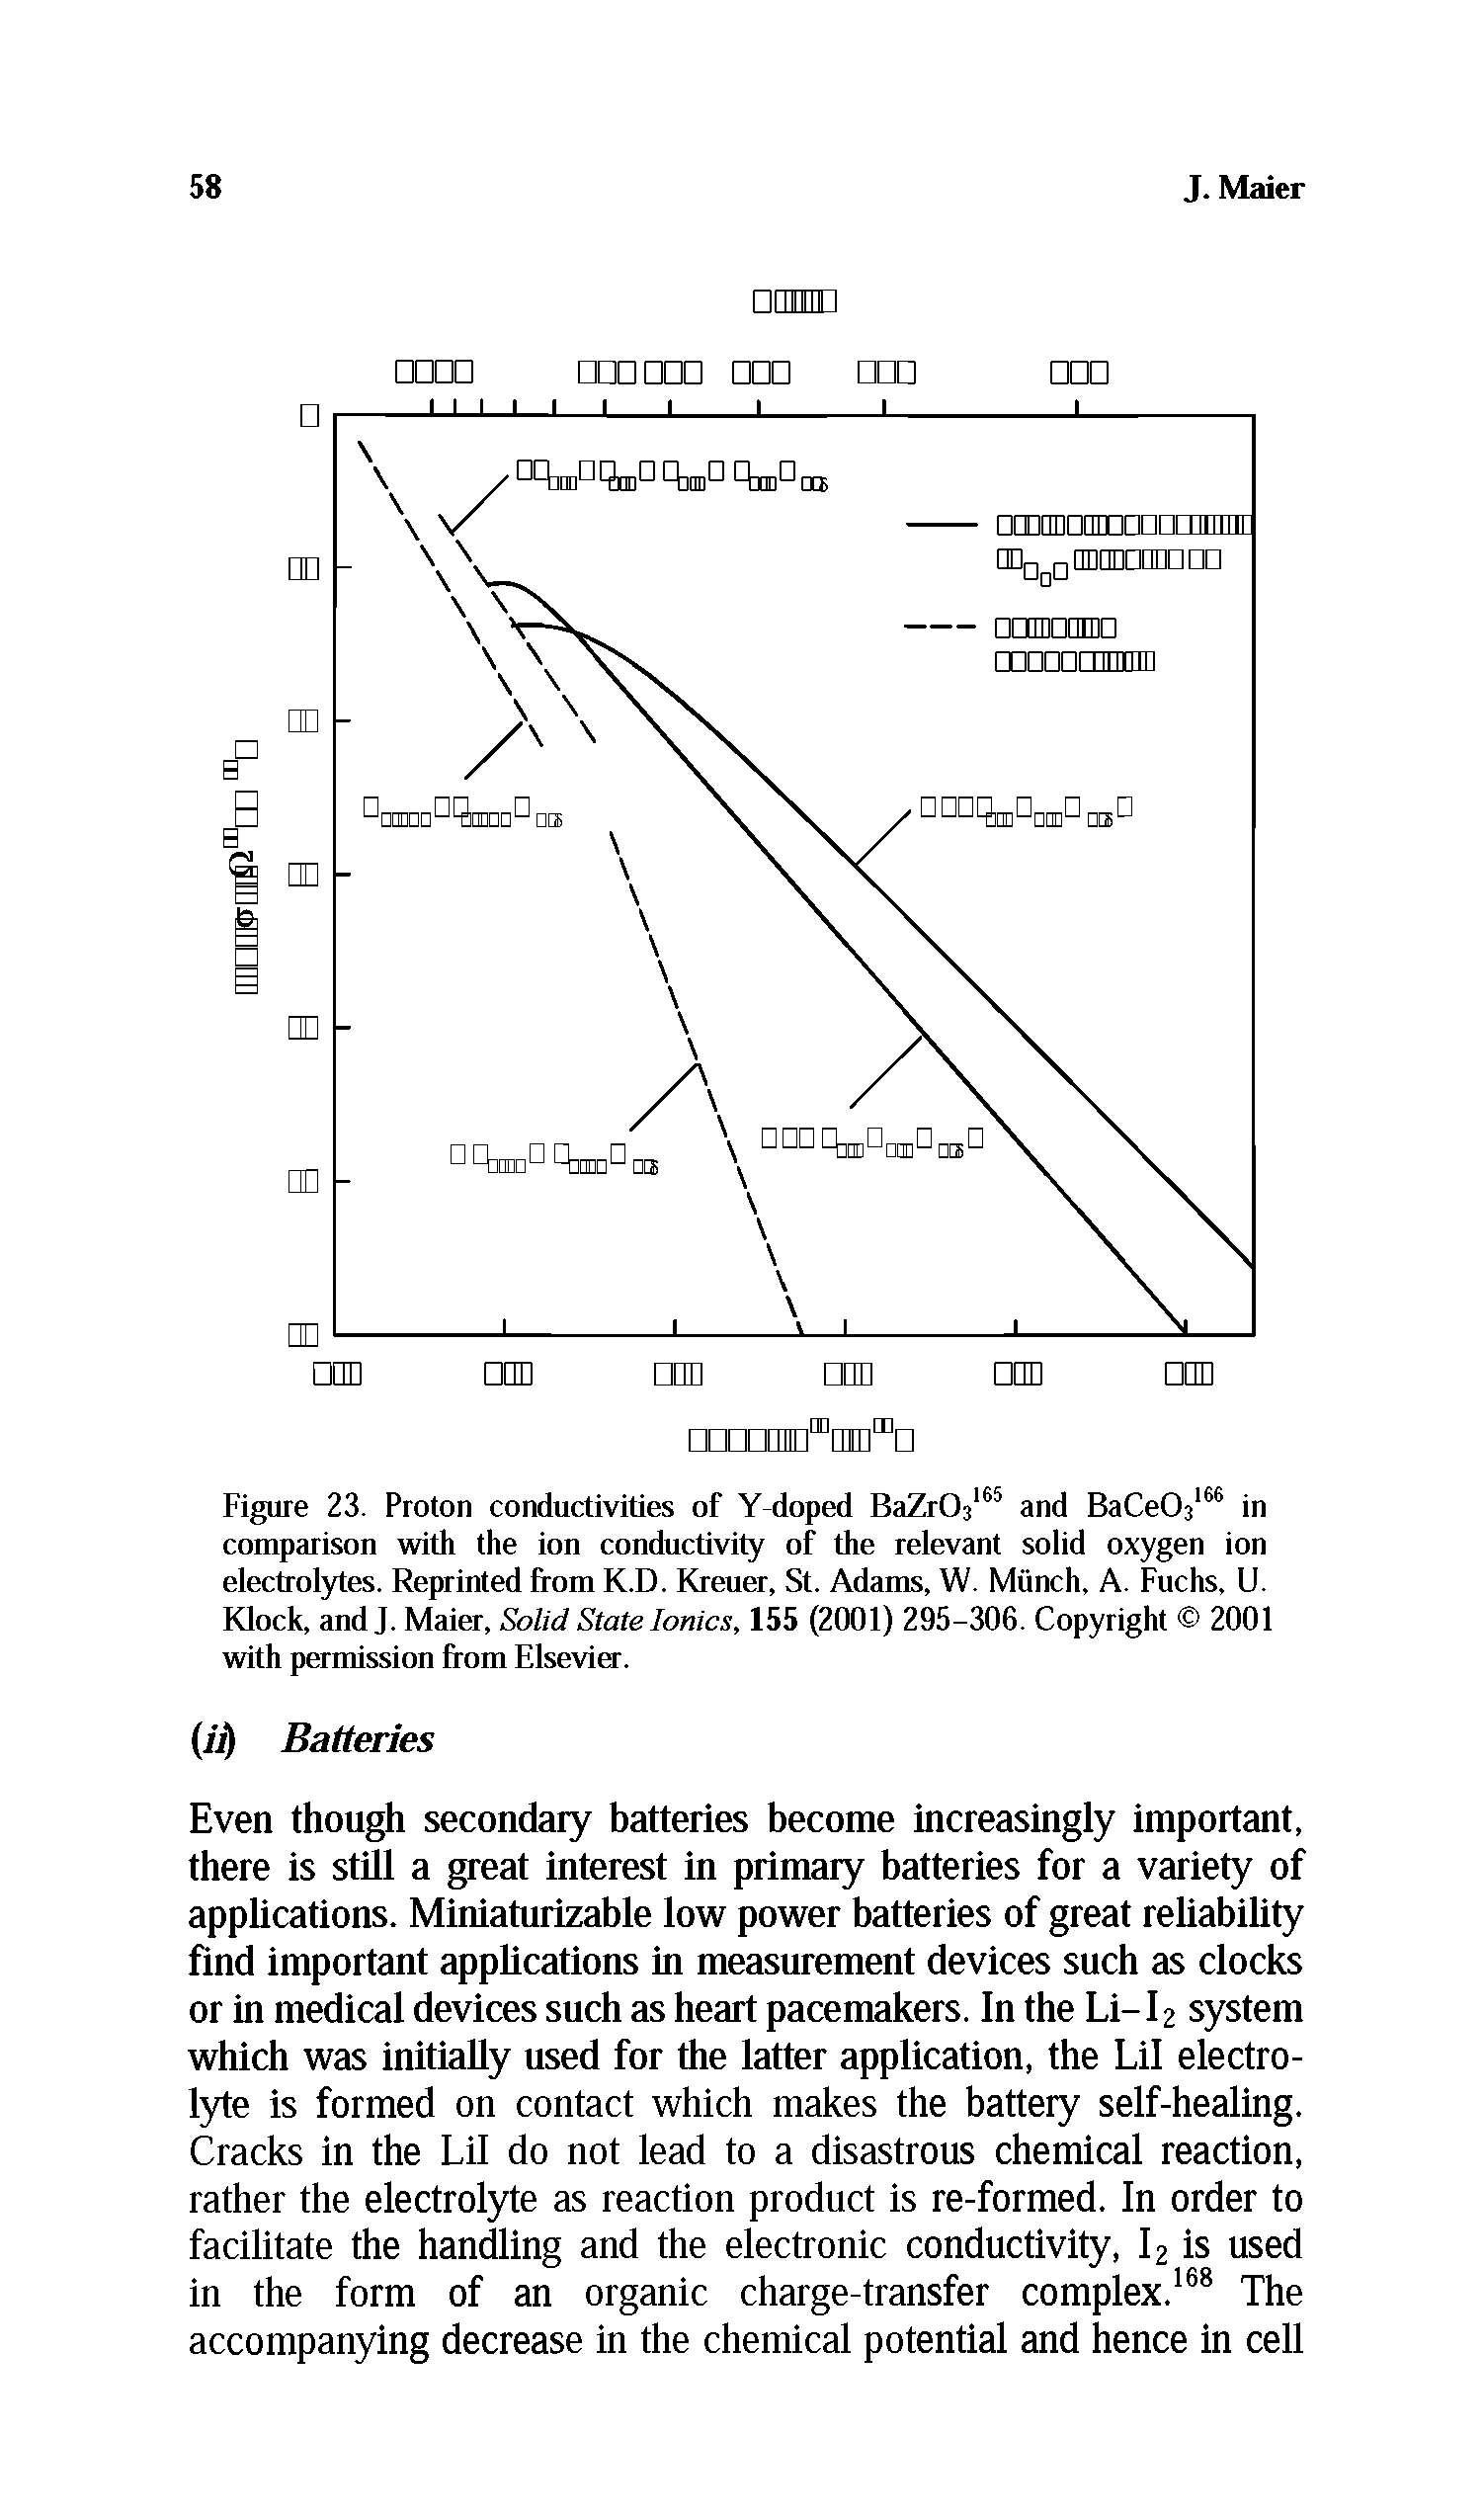 Figure 23. Proton conductivities of Y-doped BaZrOs and BaCeOs in comparison with the ion conductivity of the relevant solid oxygen ion electrol3rtes. Reprinted from K.D. Kreuer, St. Adams, W. Miinch, A. Fuchs, U. Klock, and J. Maier, Solid State Ionics, 155 (2001) 295-306. Copyright 2001 with permission from Elsevier.